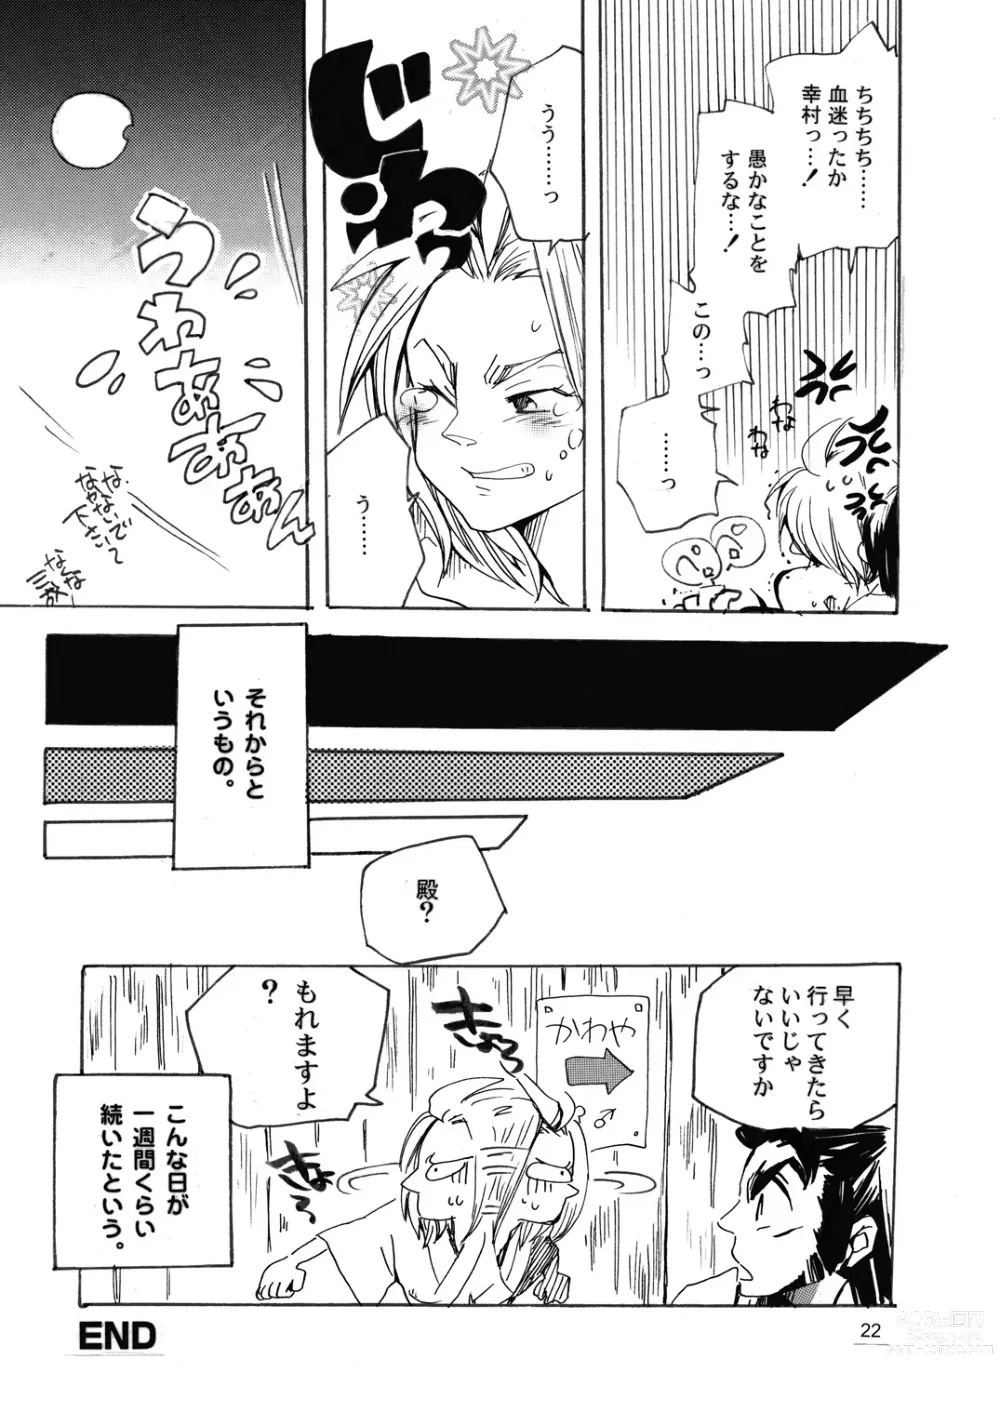 Page 24 of doujinshi MANIACCESS